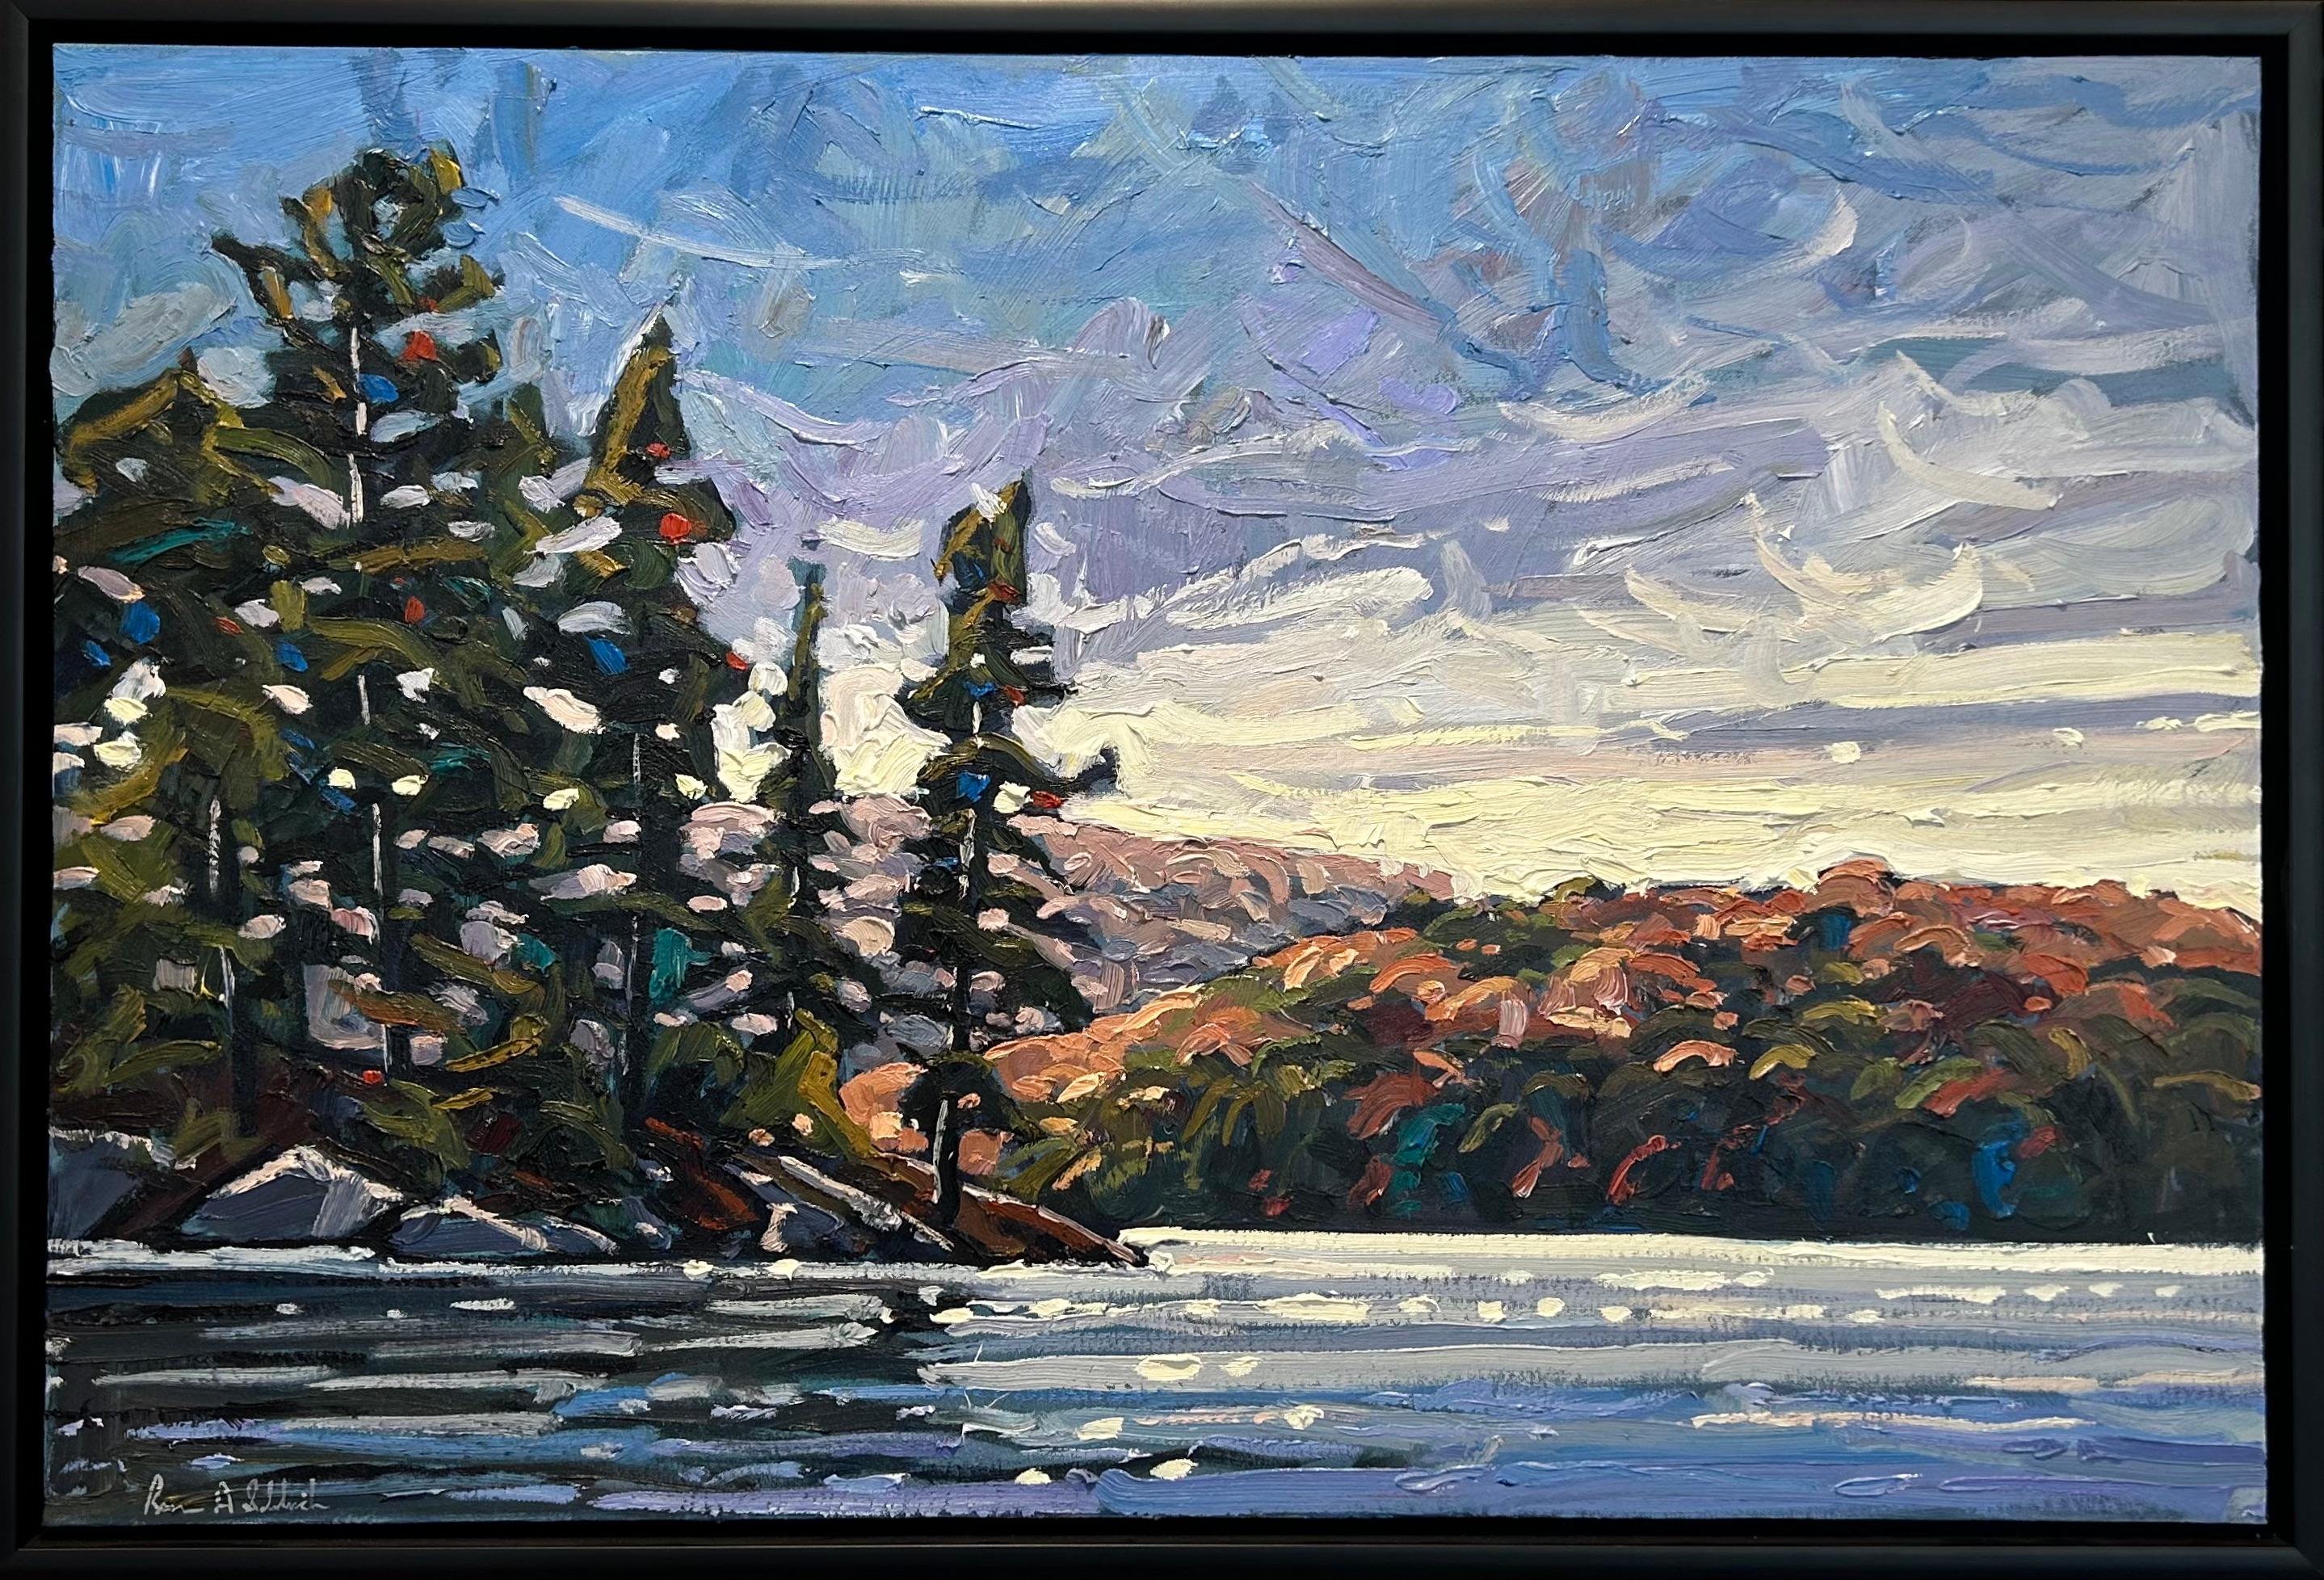 Ryan A. Sobkovich Landscape Painting - Algonquin Park Fall Landscape Oil on Canvas 'Paddling on Tea Lake in October' 